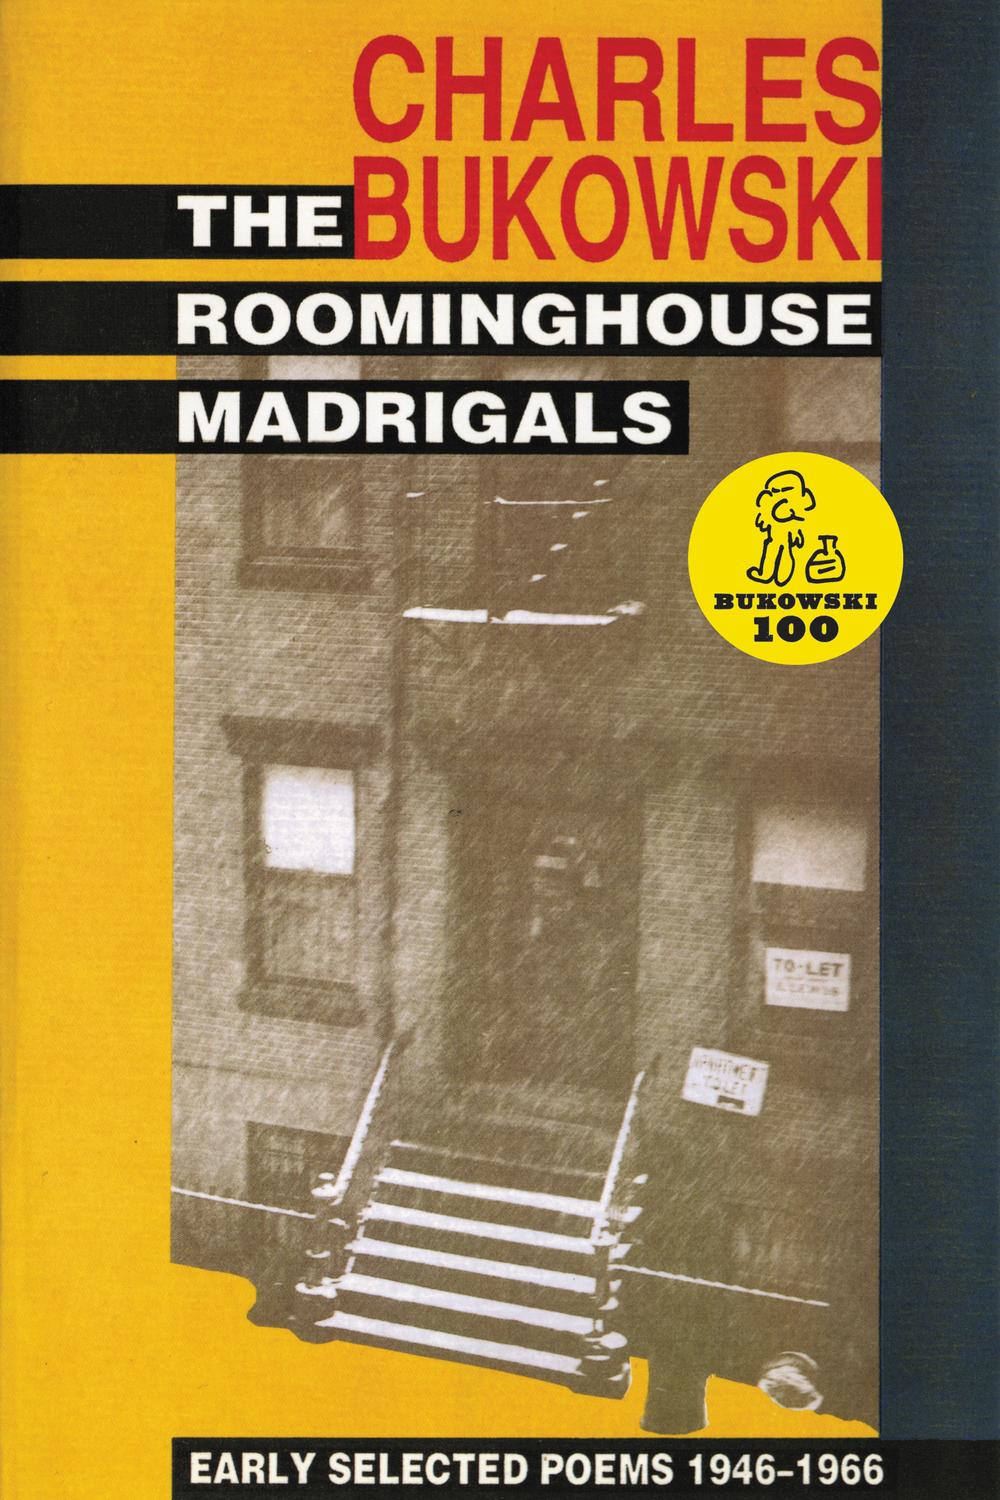 The Roominghouse Madrigals - Charles Bukowski